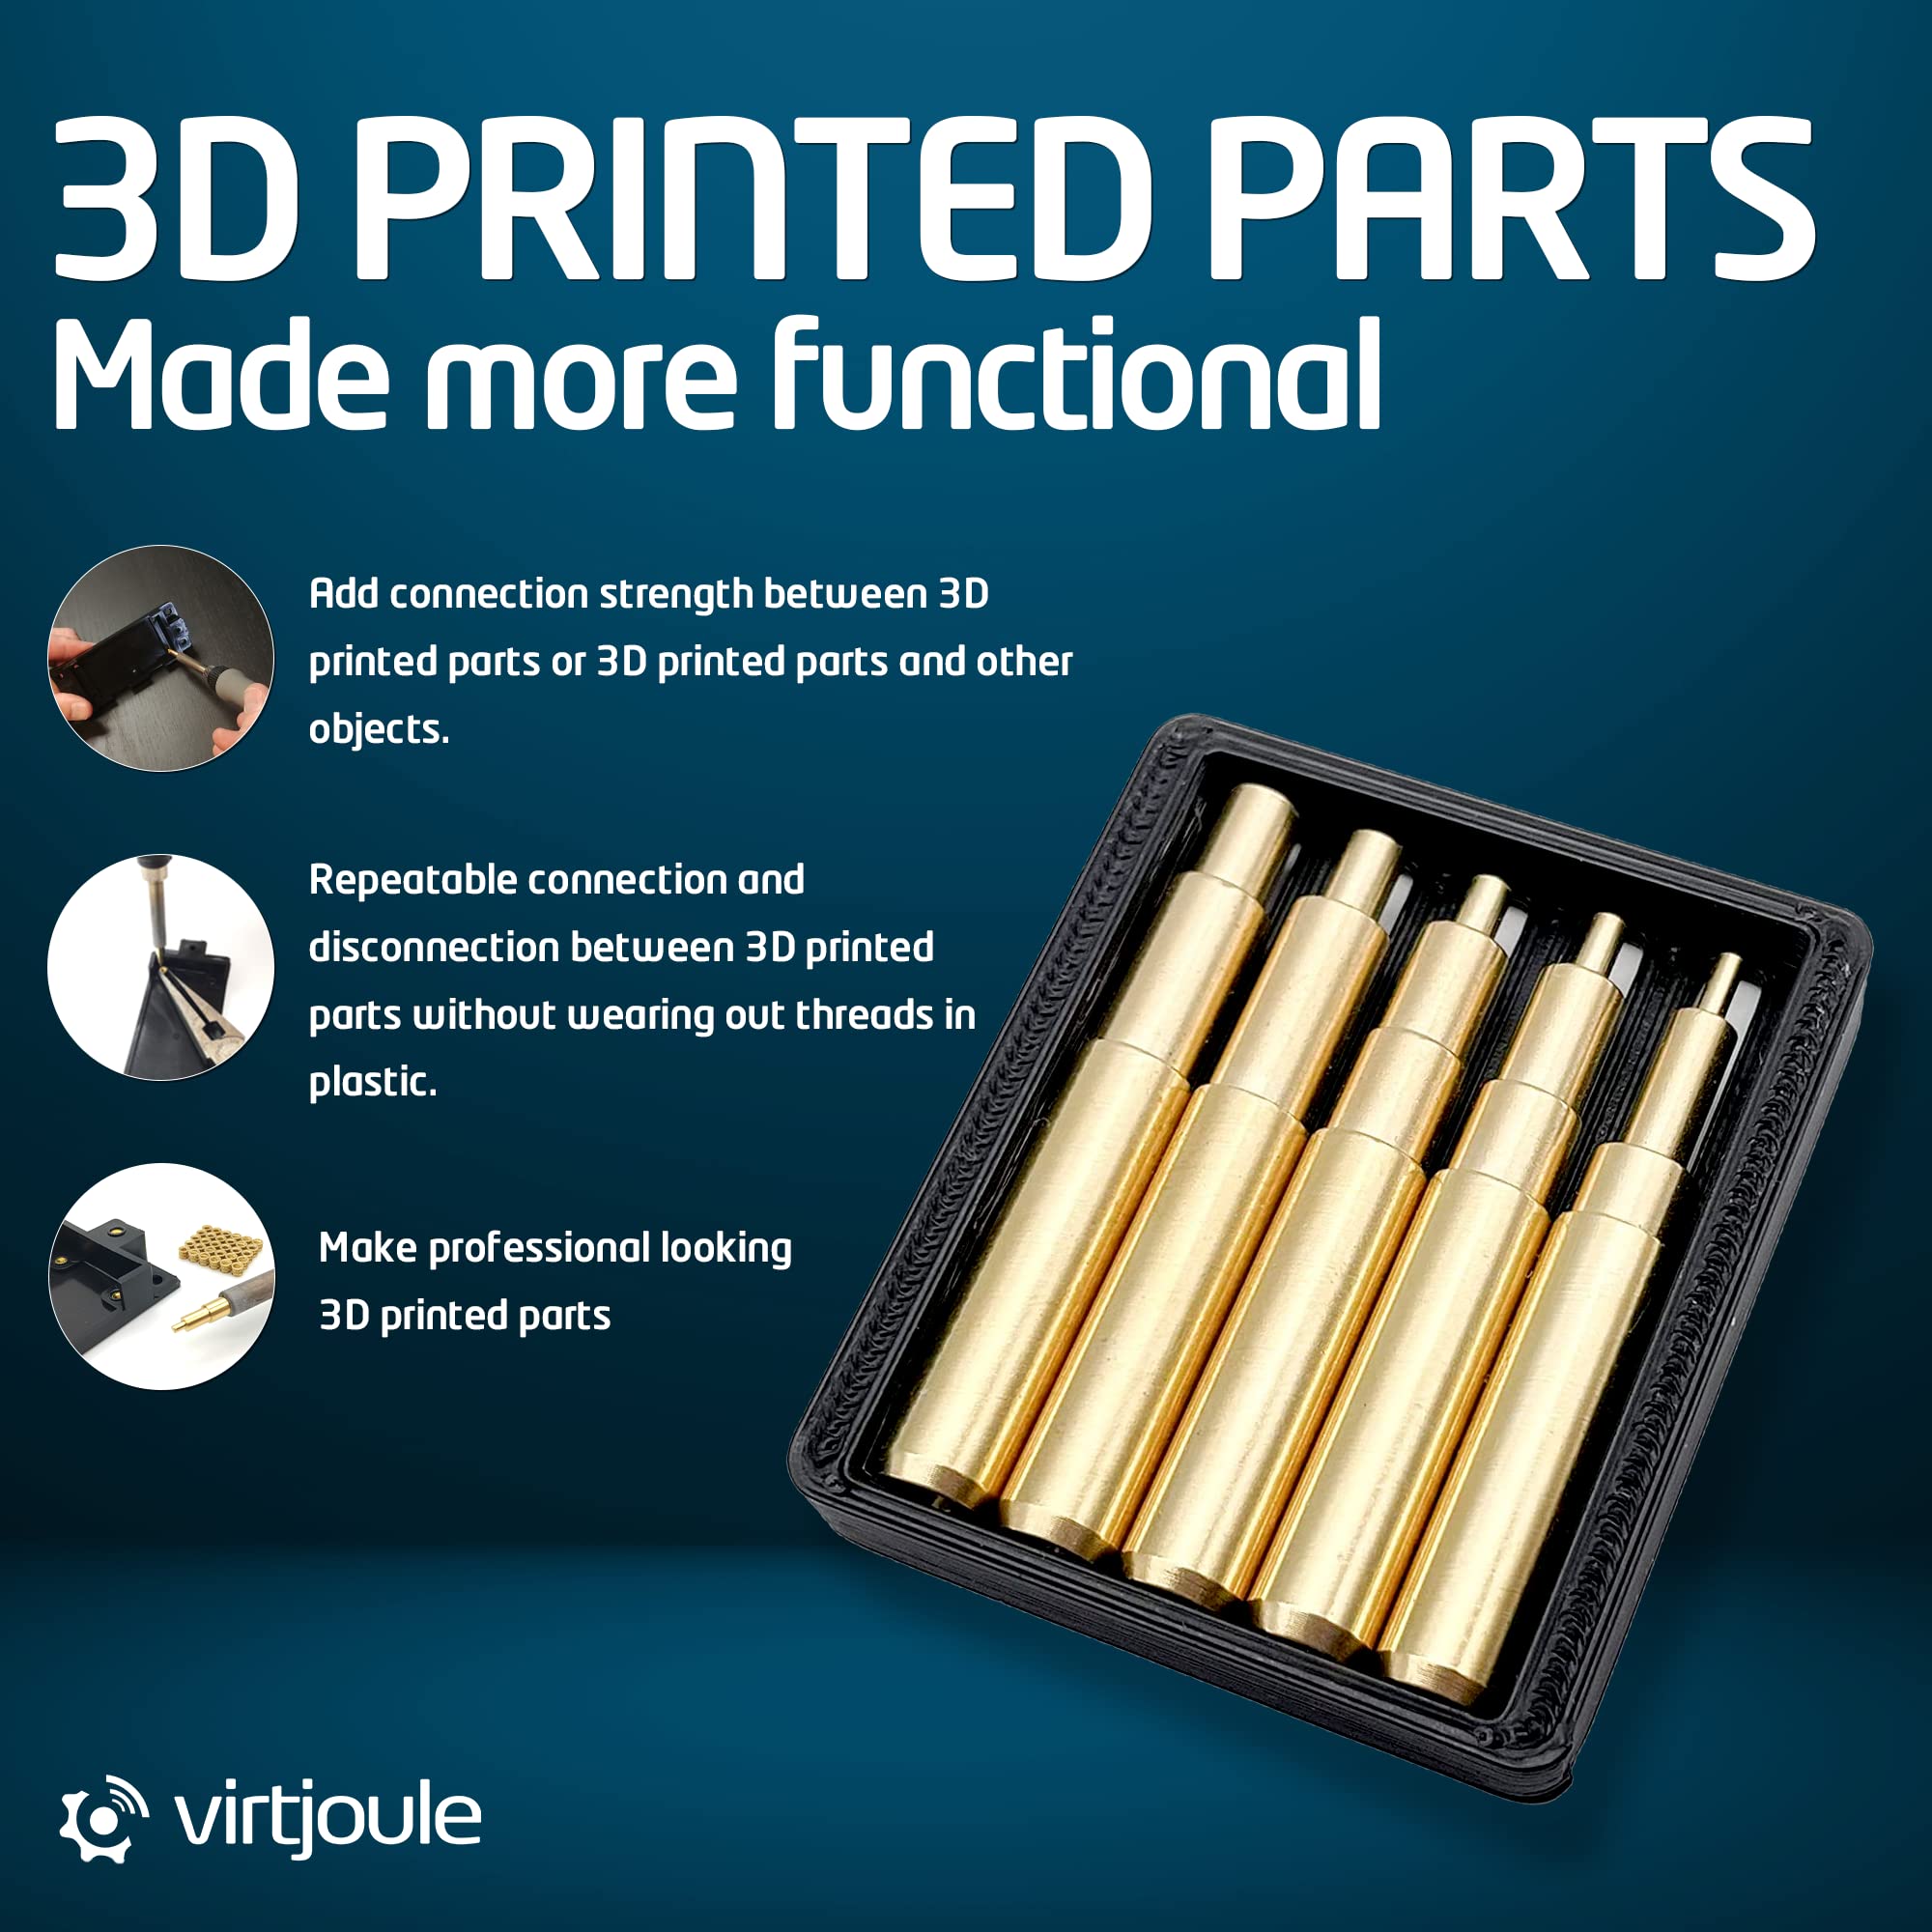 Virtjoule Heat Set Insert Tips for Sizes M2, M2.5, M3, M4, and M5 - Soldering Iron Tips for 3D Printer Users, 3D Printing Accessories Compatible with Hakko FX-888D and Weller SP40NKUS Soldering Irons